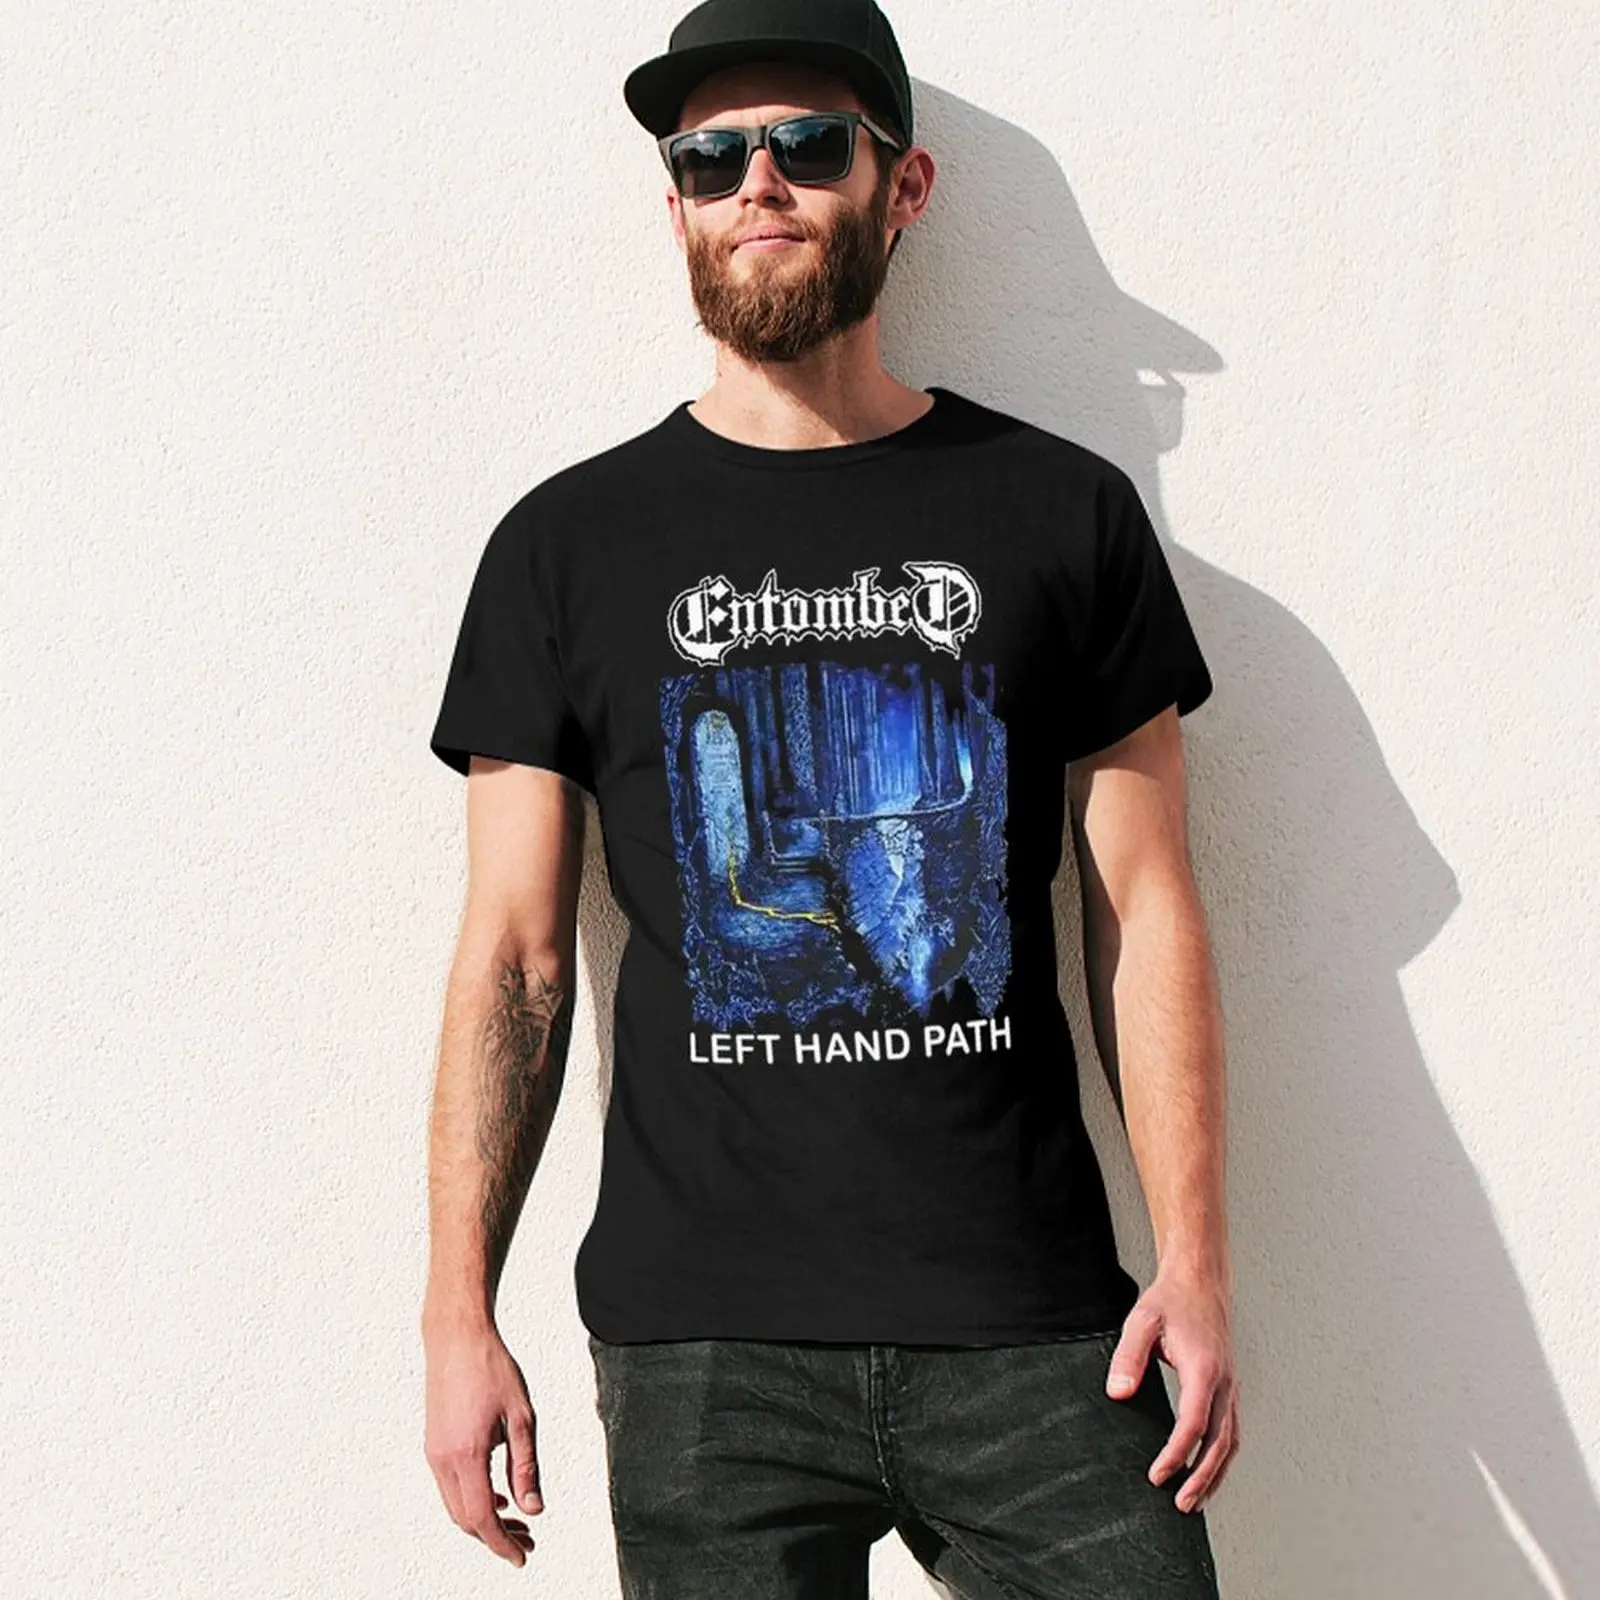 entombed essential T-Shirt blacks customs design your own cute tops mens workout shirts